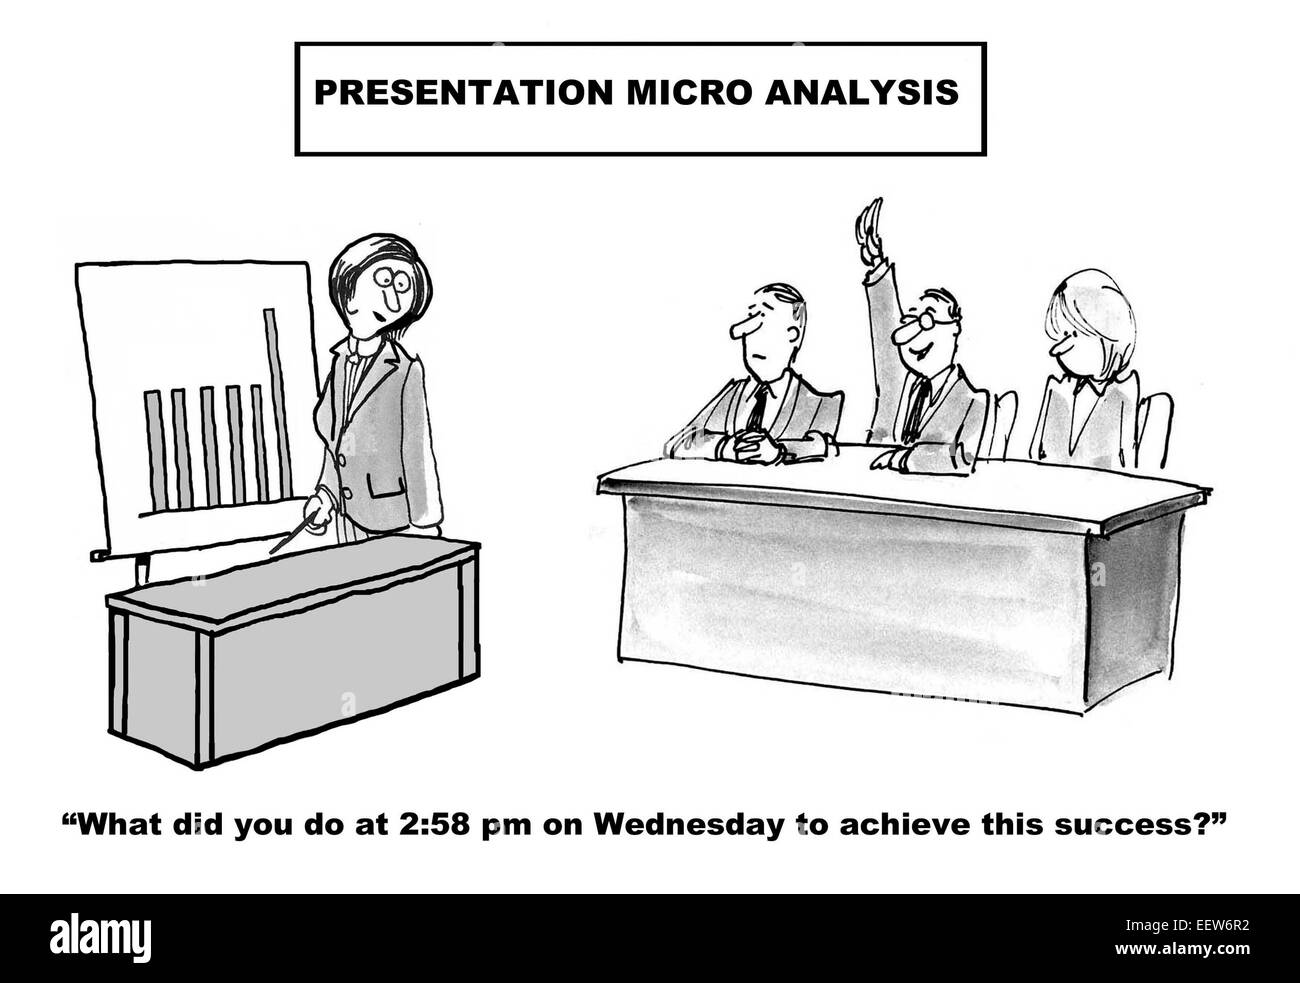 Cartoon of businesswoman presenting successful business results and being asked micro analysis questions. Stock Photo